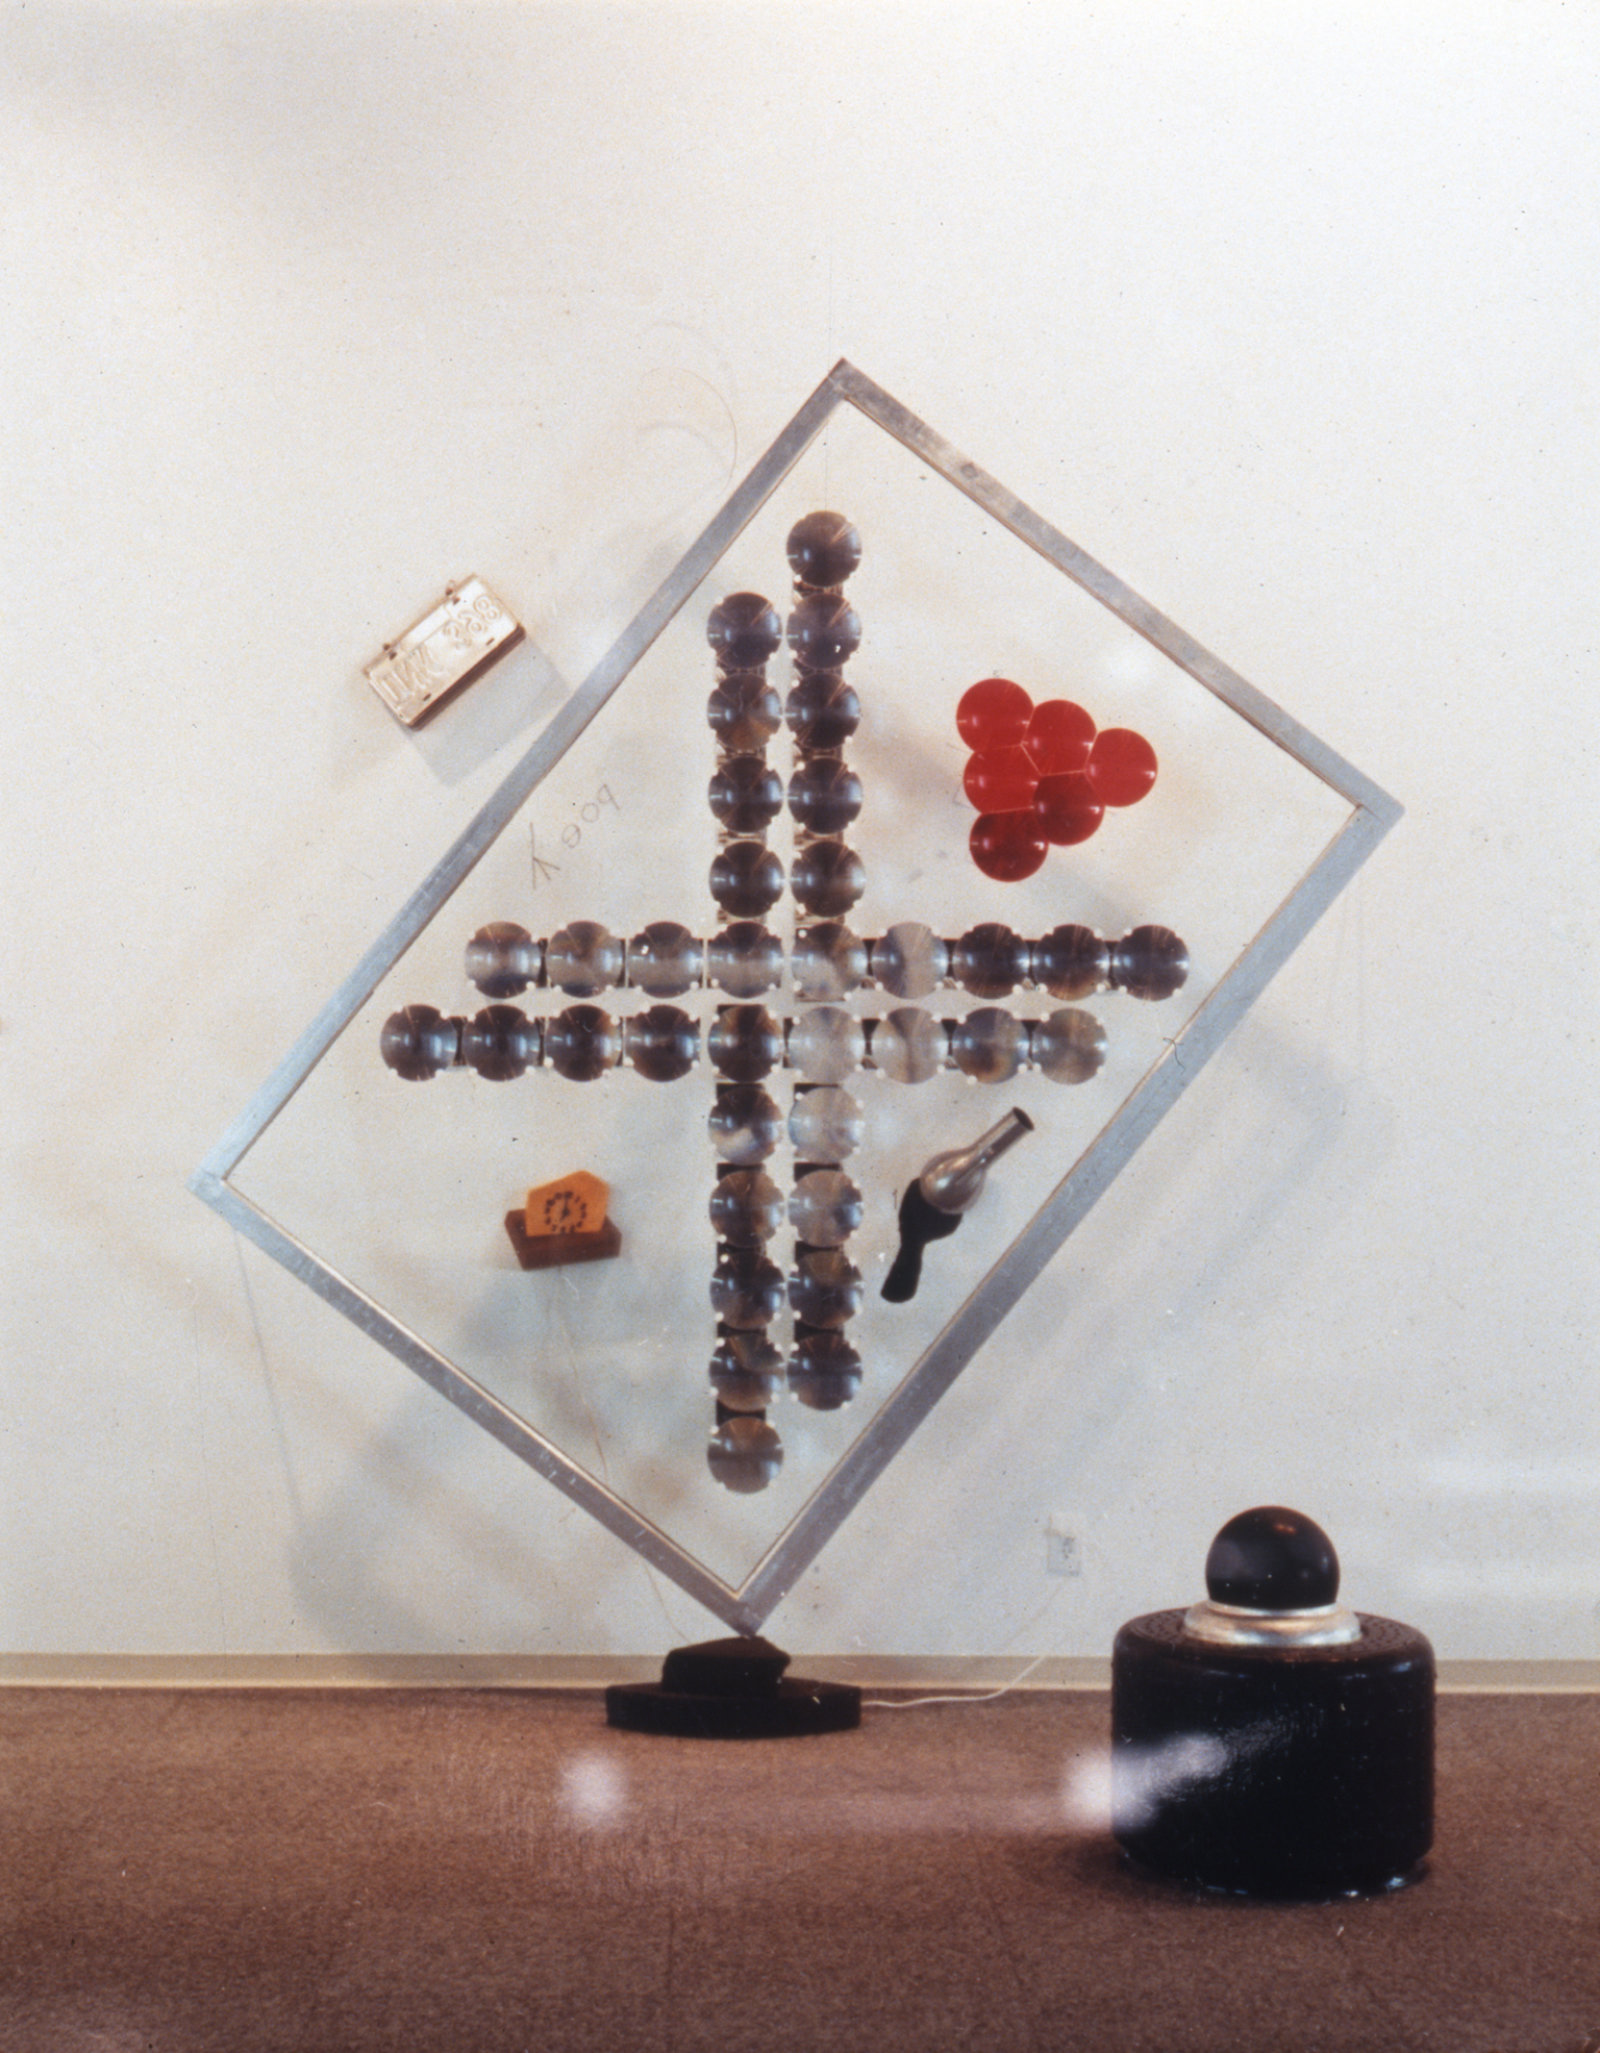 Jerry Pethick, Composite Portrait, 1990, wood, plastic fresnel lenses, red lens, license plates, plastic, stainless steel, flowers cubist plastic cheese, clock, carborundum grinding wheels, glass, 92 x 98 x 13 in. (233 x 249 x 33 cm)